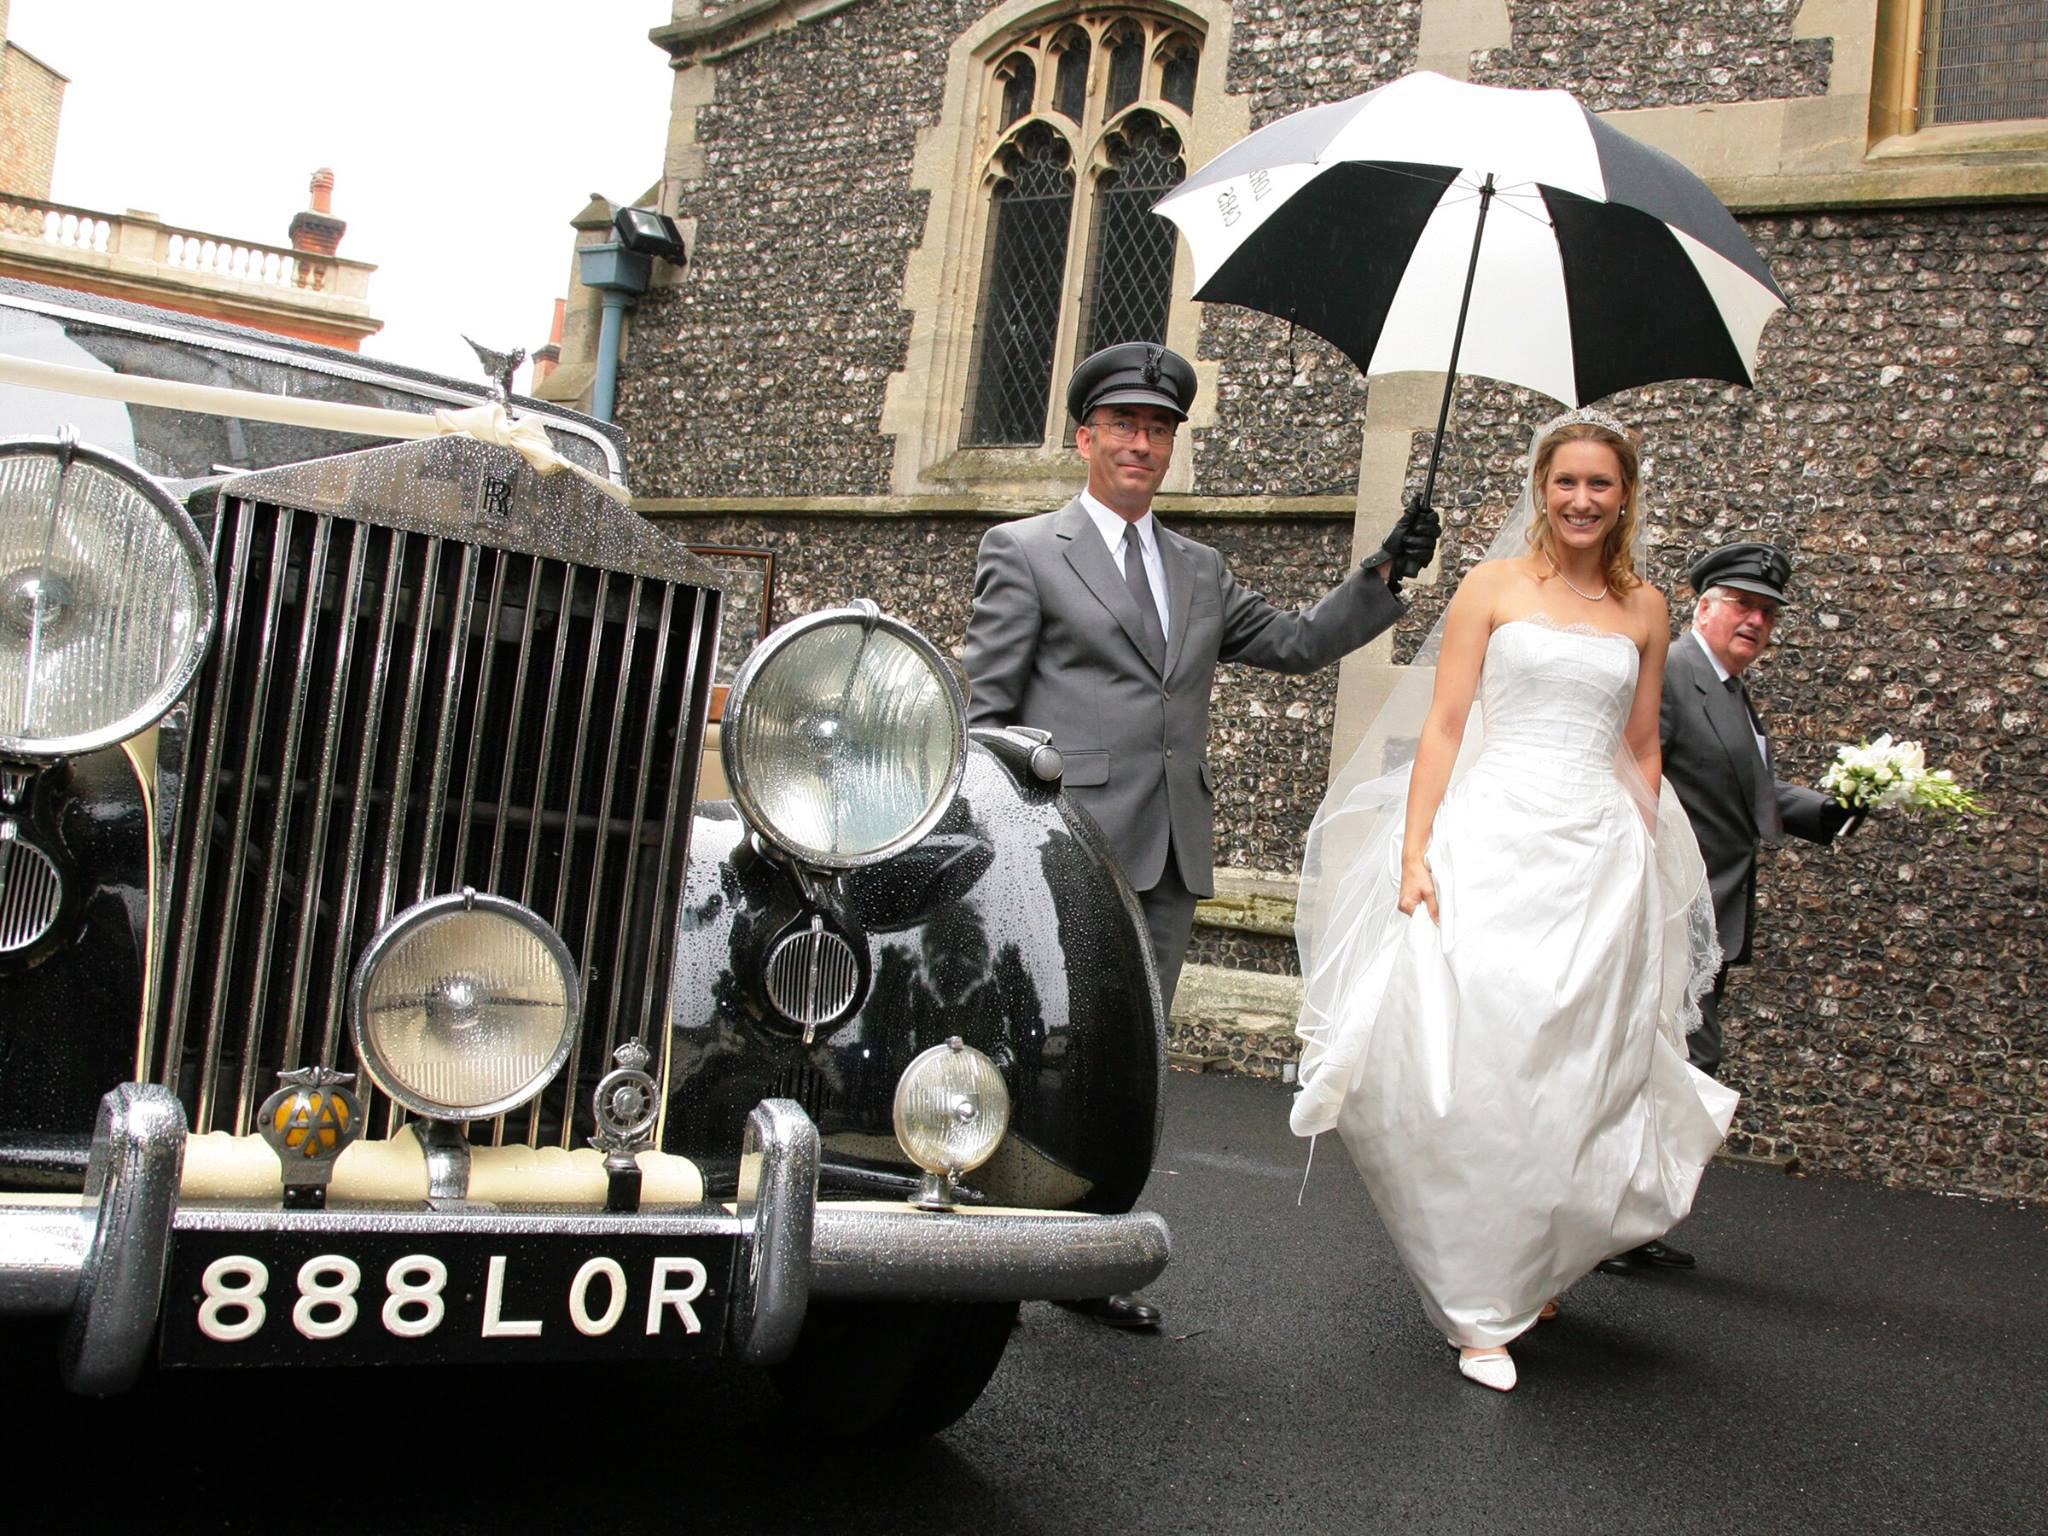 Wedding car chauffeur walking a smiling bride wearing a white dress to the church holding an umbrella in his hand.